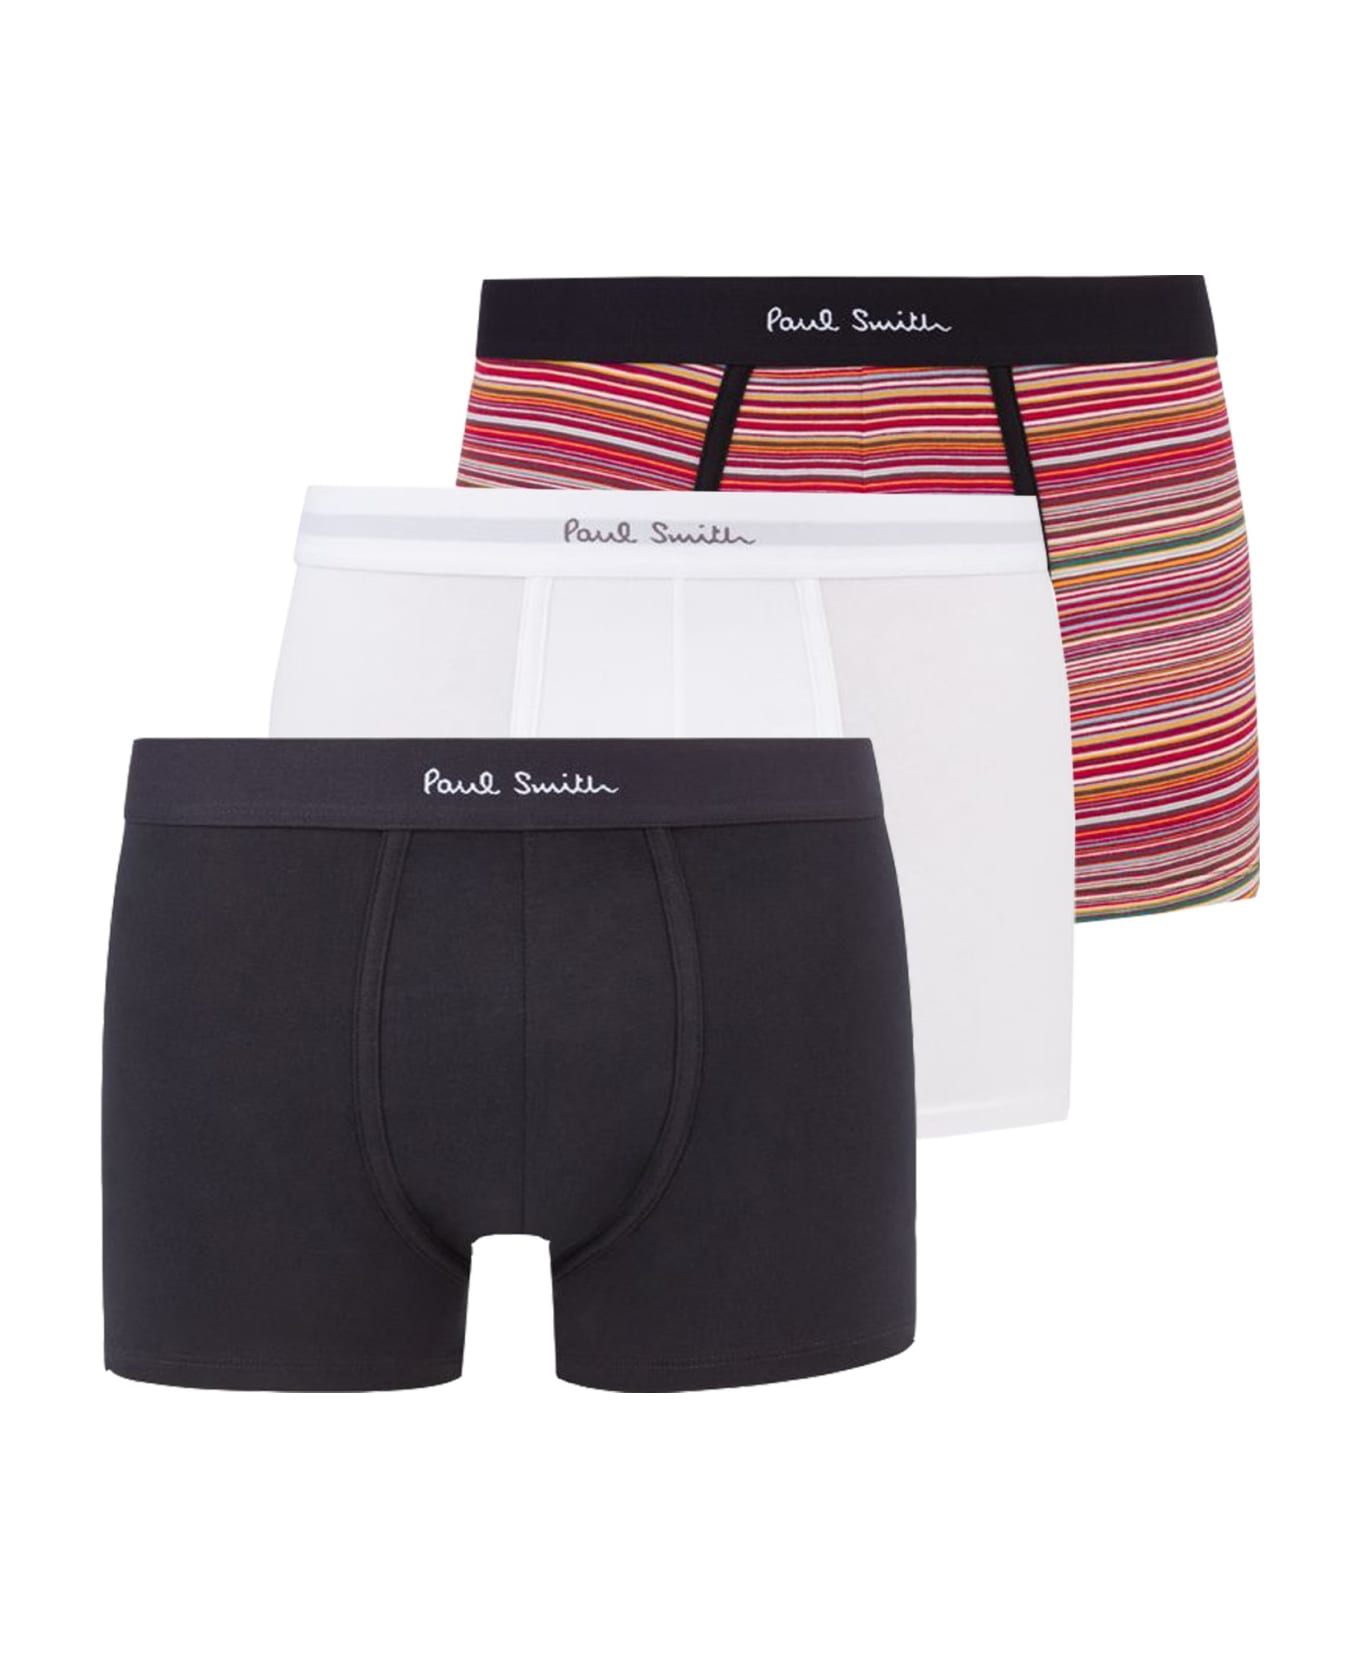 Paul Smith Pack Of Three Boxers Paul Smith - MULTICOLOR ショーツ